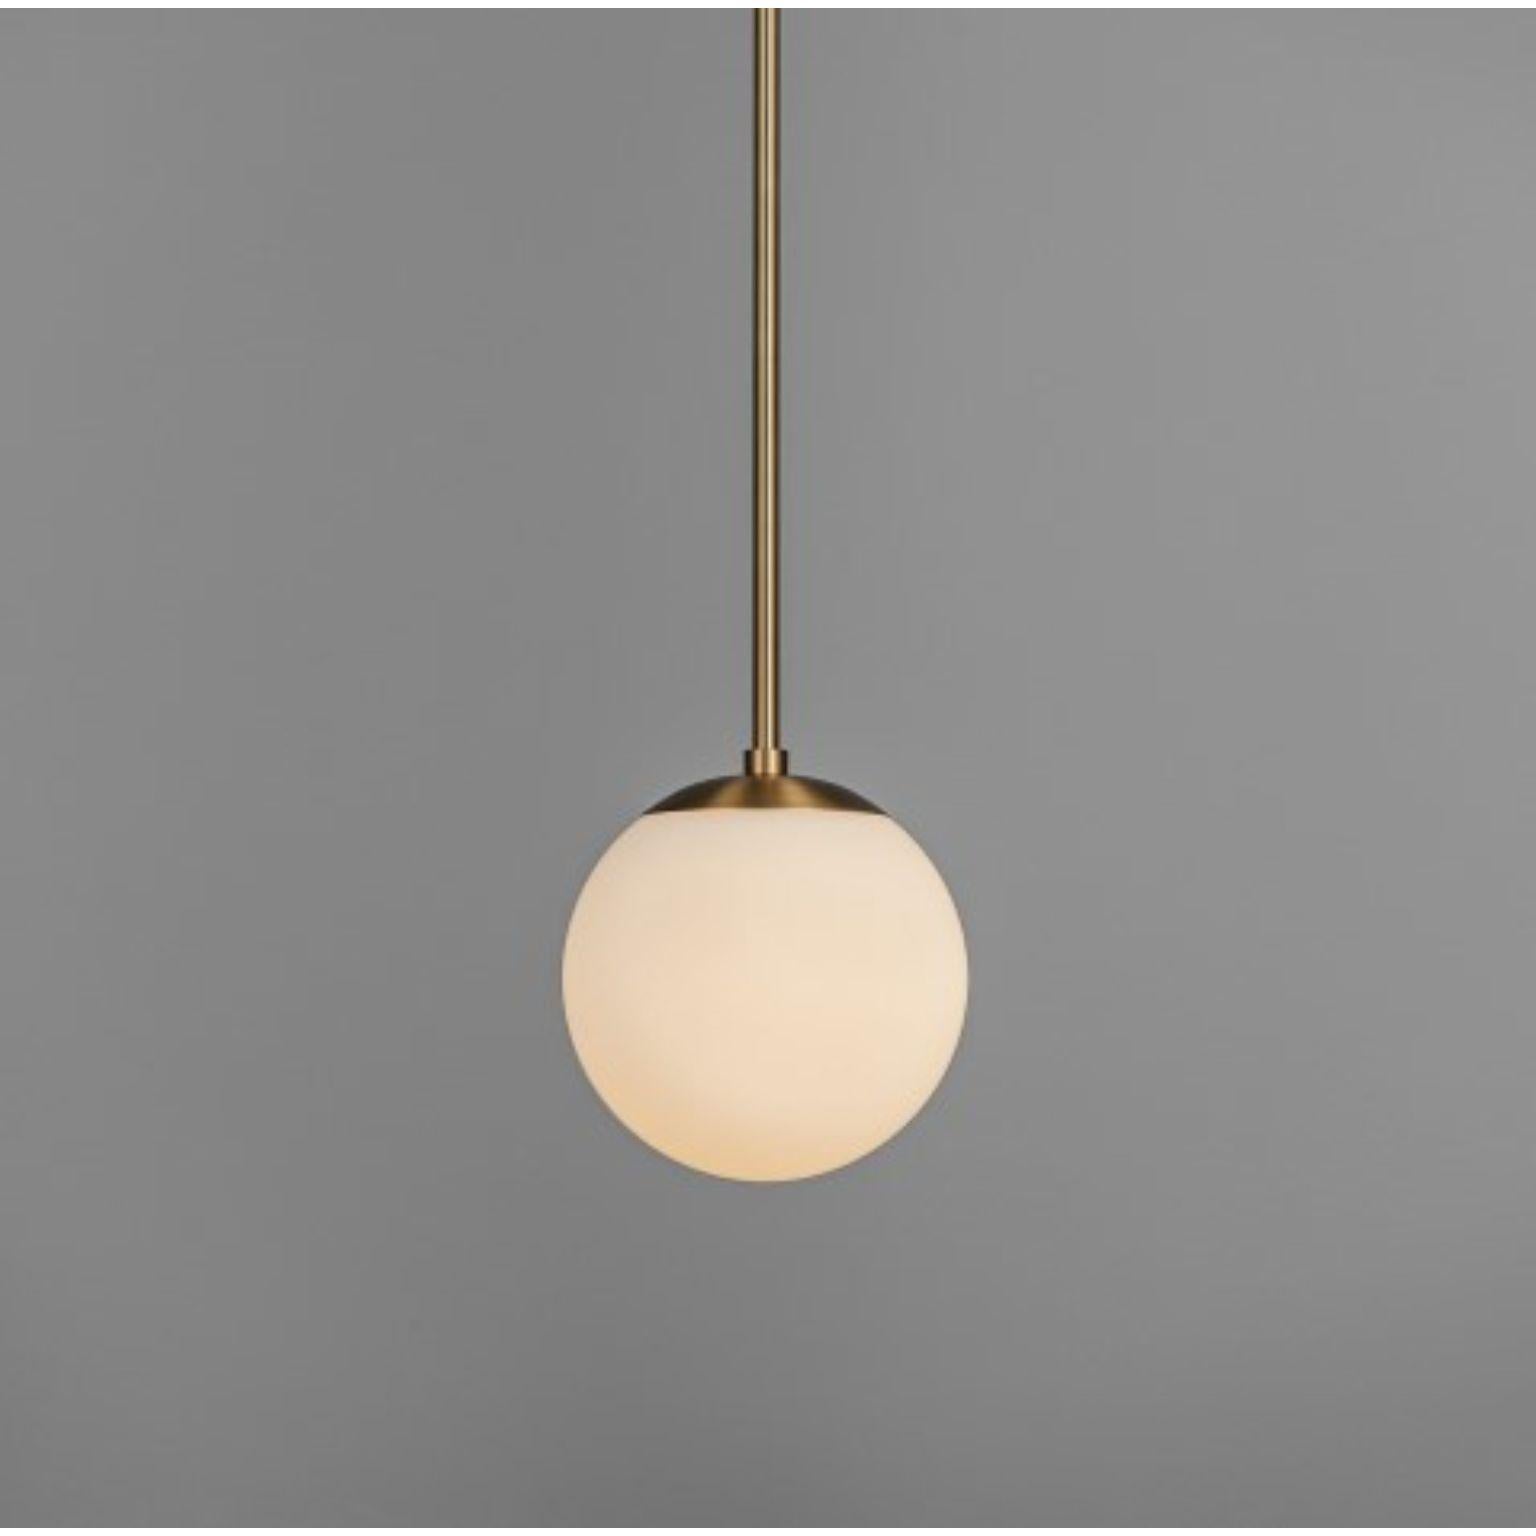 Globe Single Pendant by Schwung
Dimensions: D 20 x H 142.7 cm
Materials: Brass, Opal glass
Weight: 2.6 kg

Finishes available: Black gunmetal, polished nickel, brass
Other sizes available.

 Schwung is a german word, and loosely defined, means